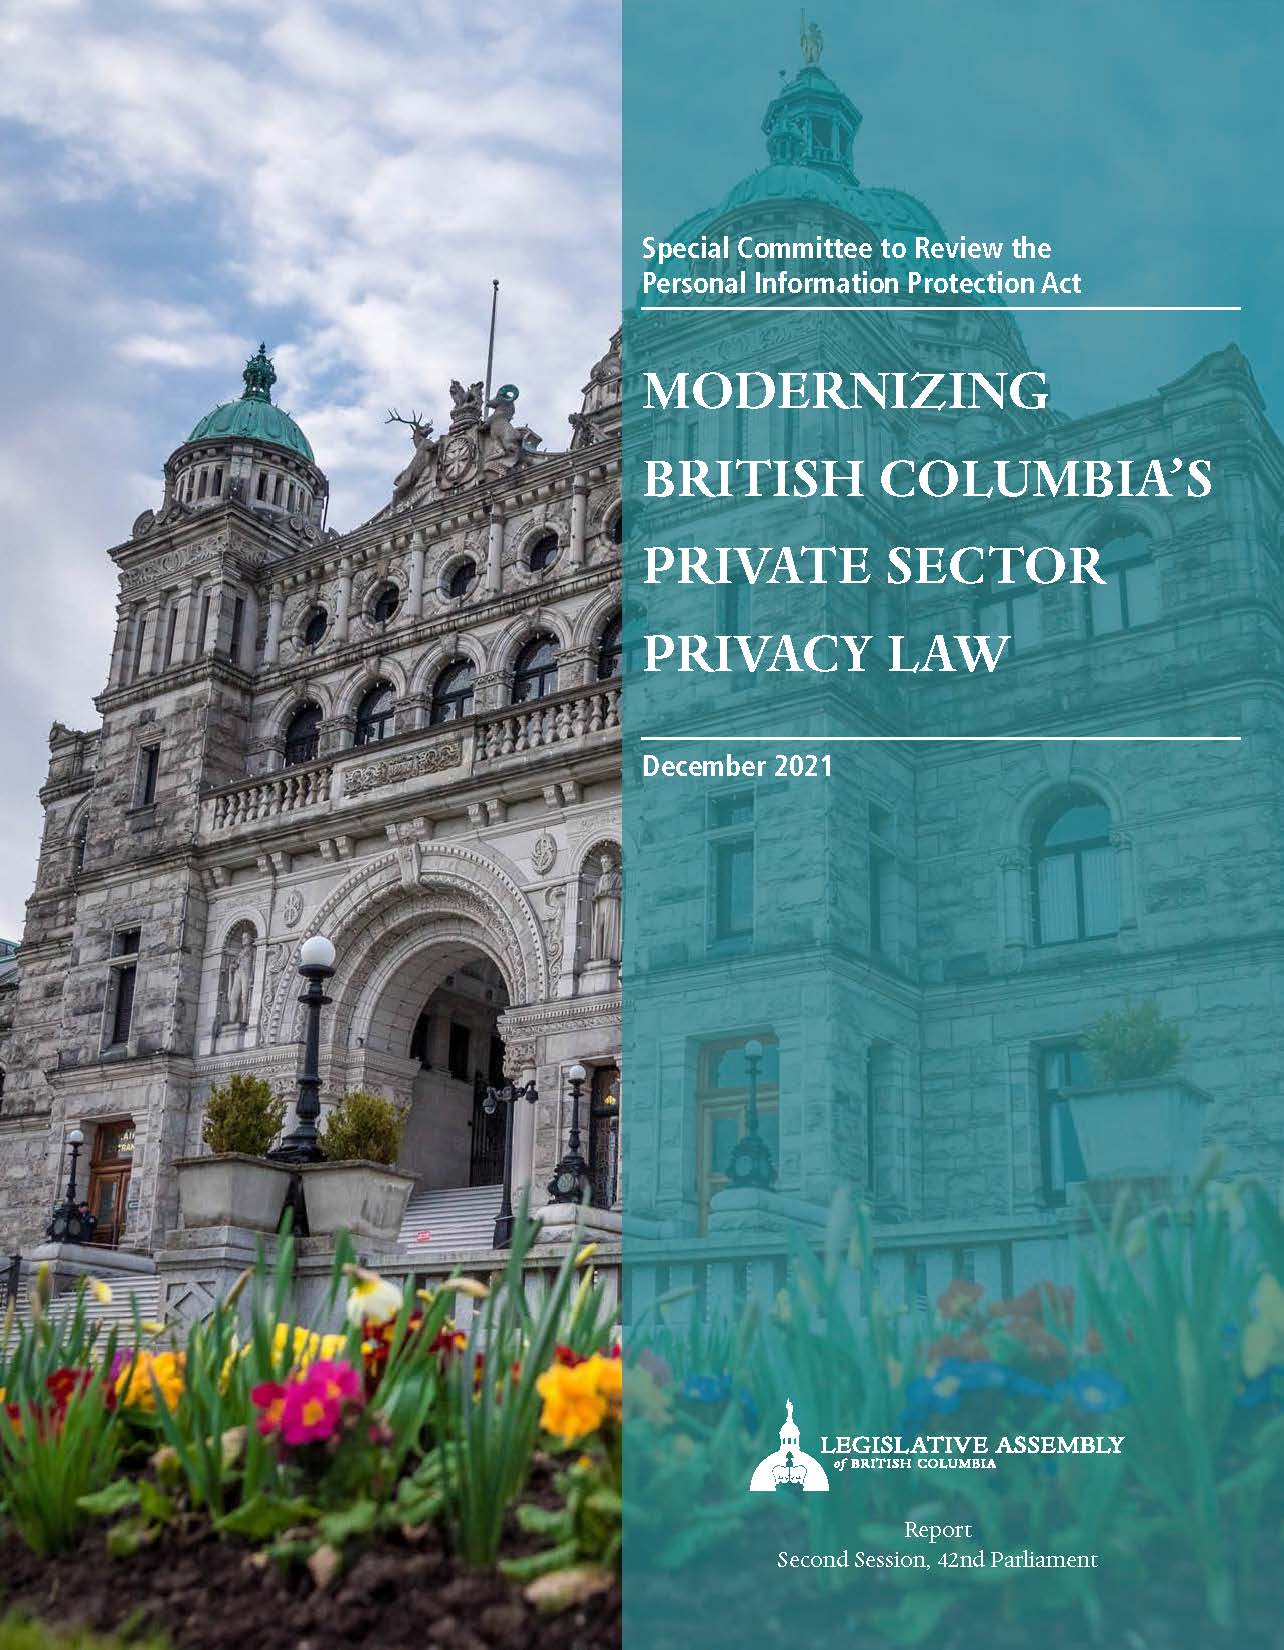 PrivacyDemocratic Rights Access to InformationReport highlights collaboration.